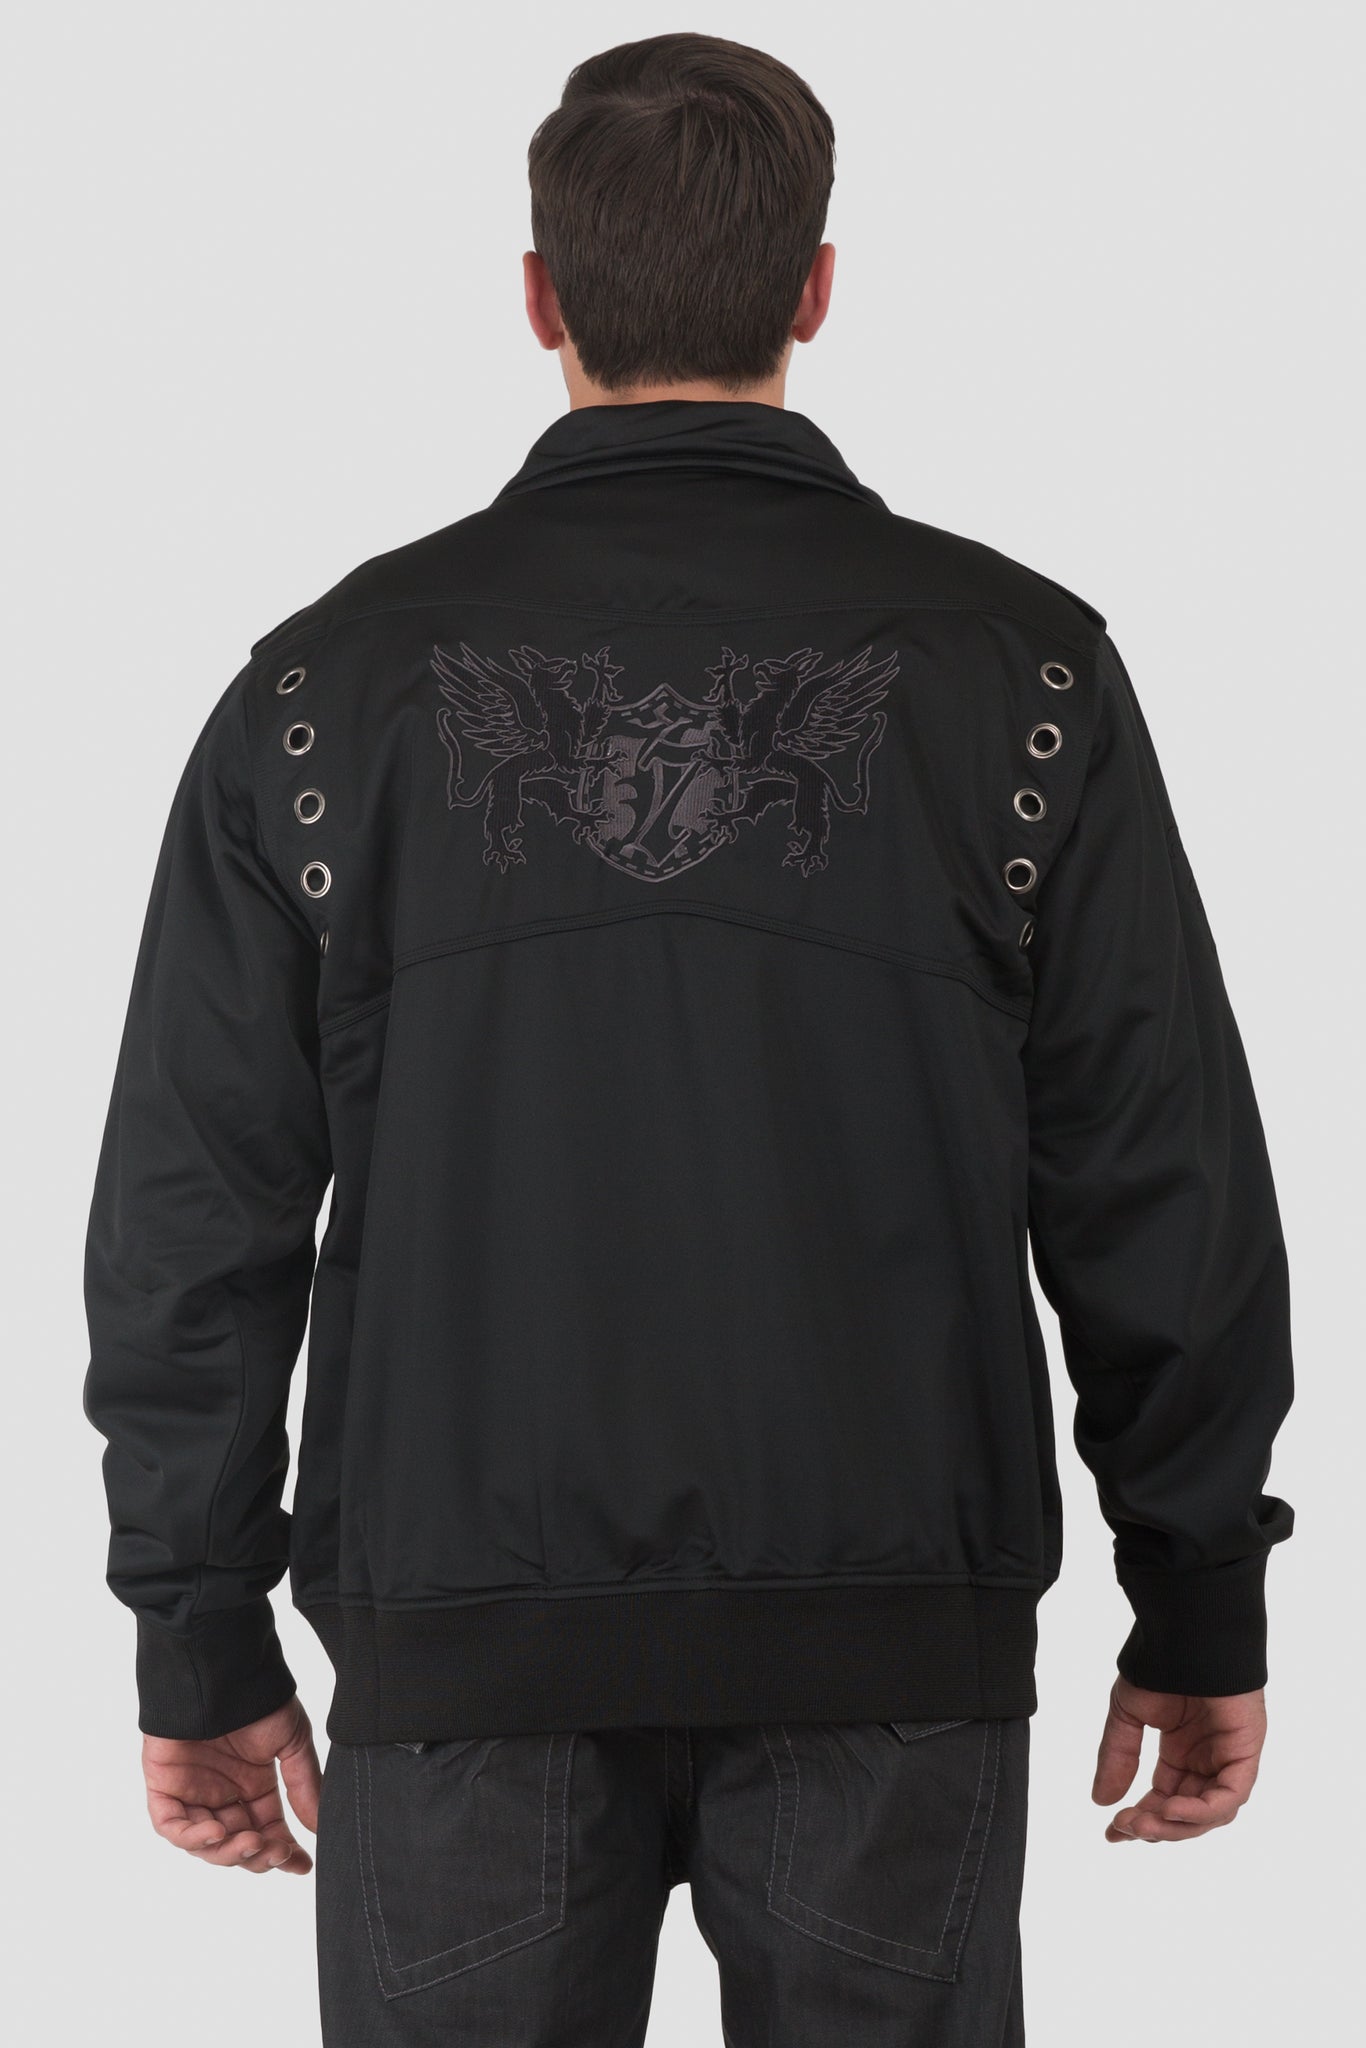 Men's Black Poly Performance Full Zip Track Jacket With Black EMB Patches